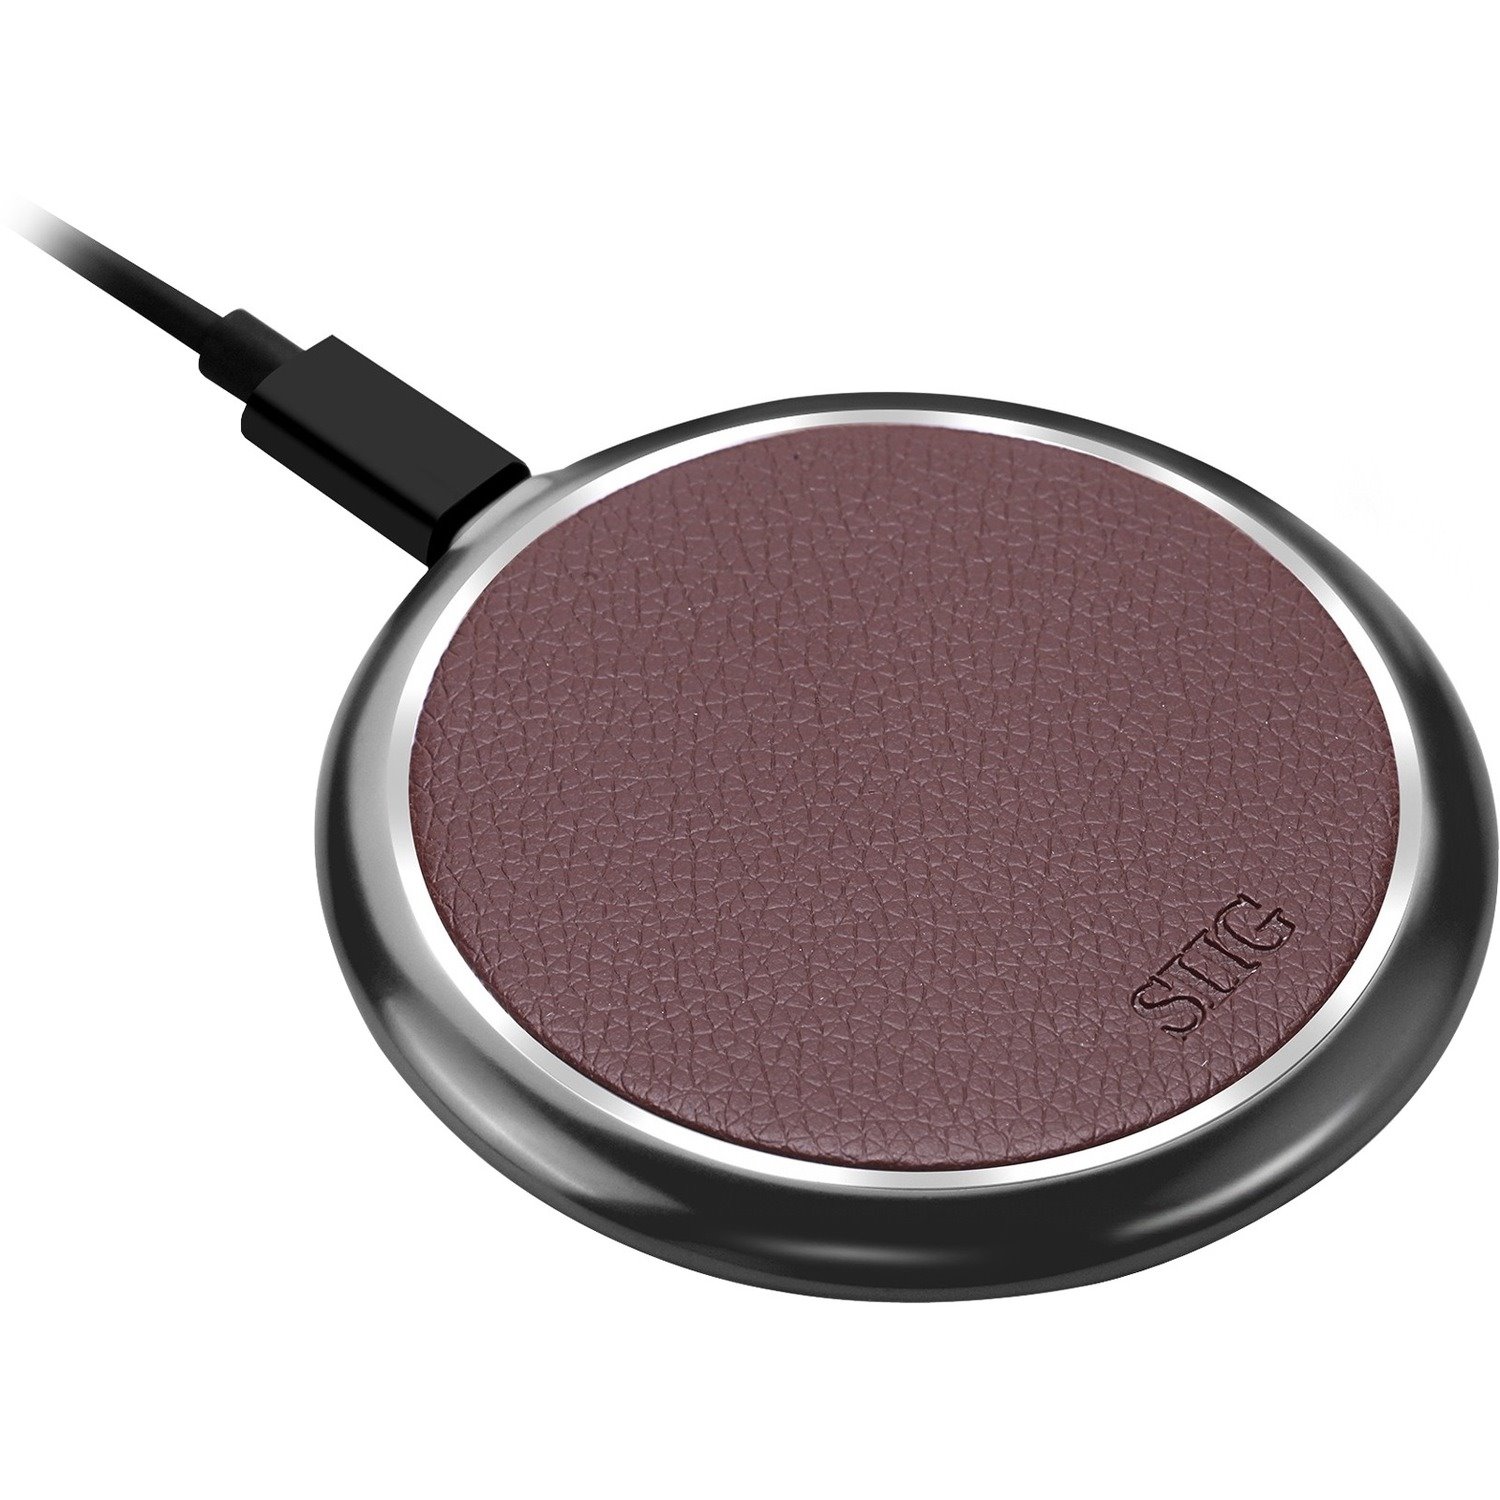 SIIG Premium Wireless Smartphone Charger Pad - Brown